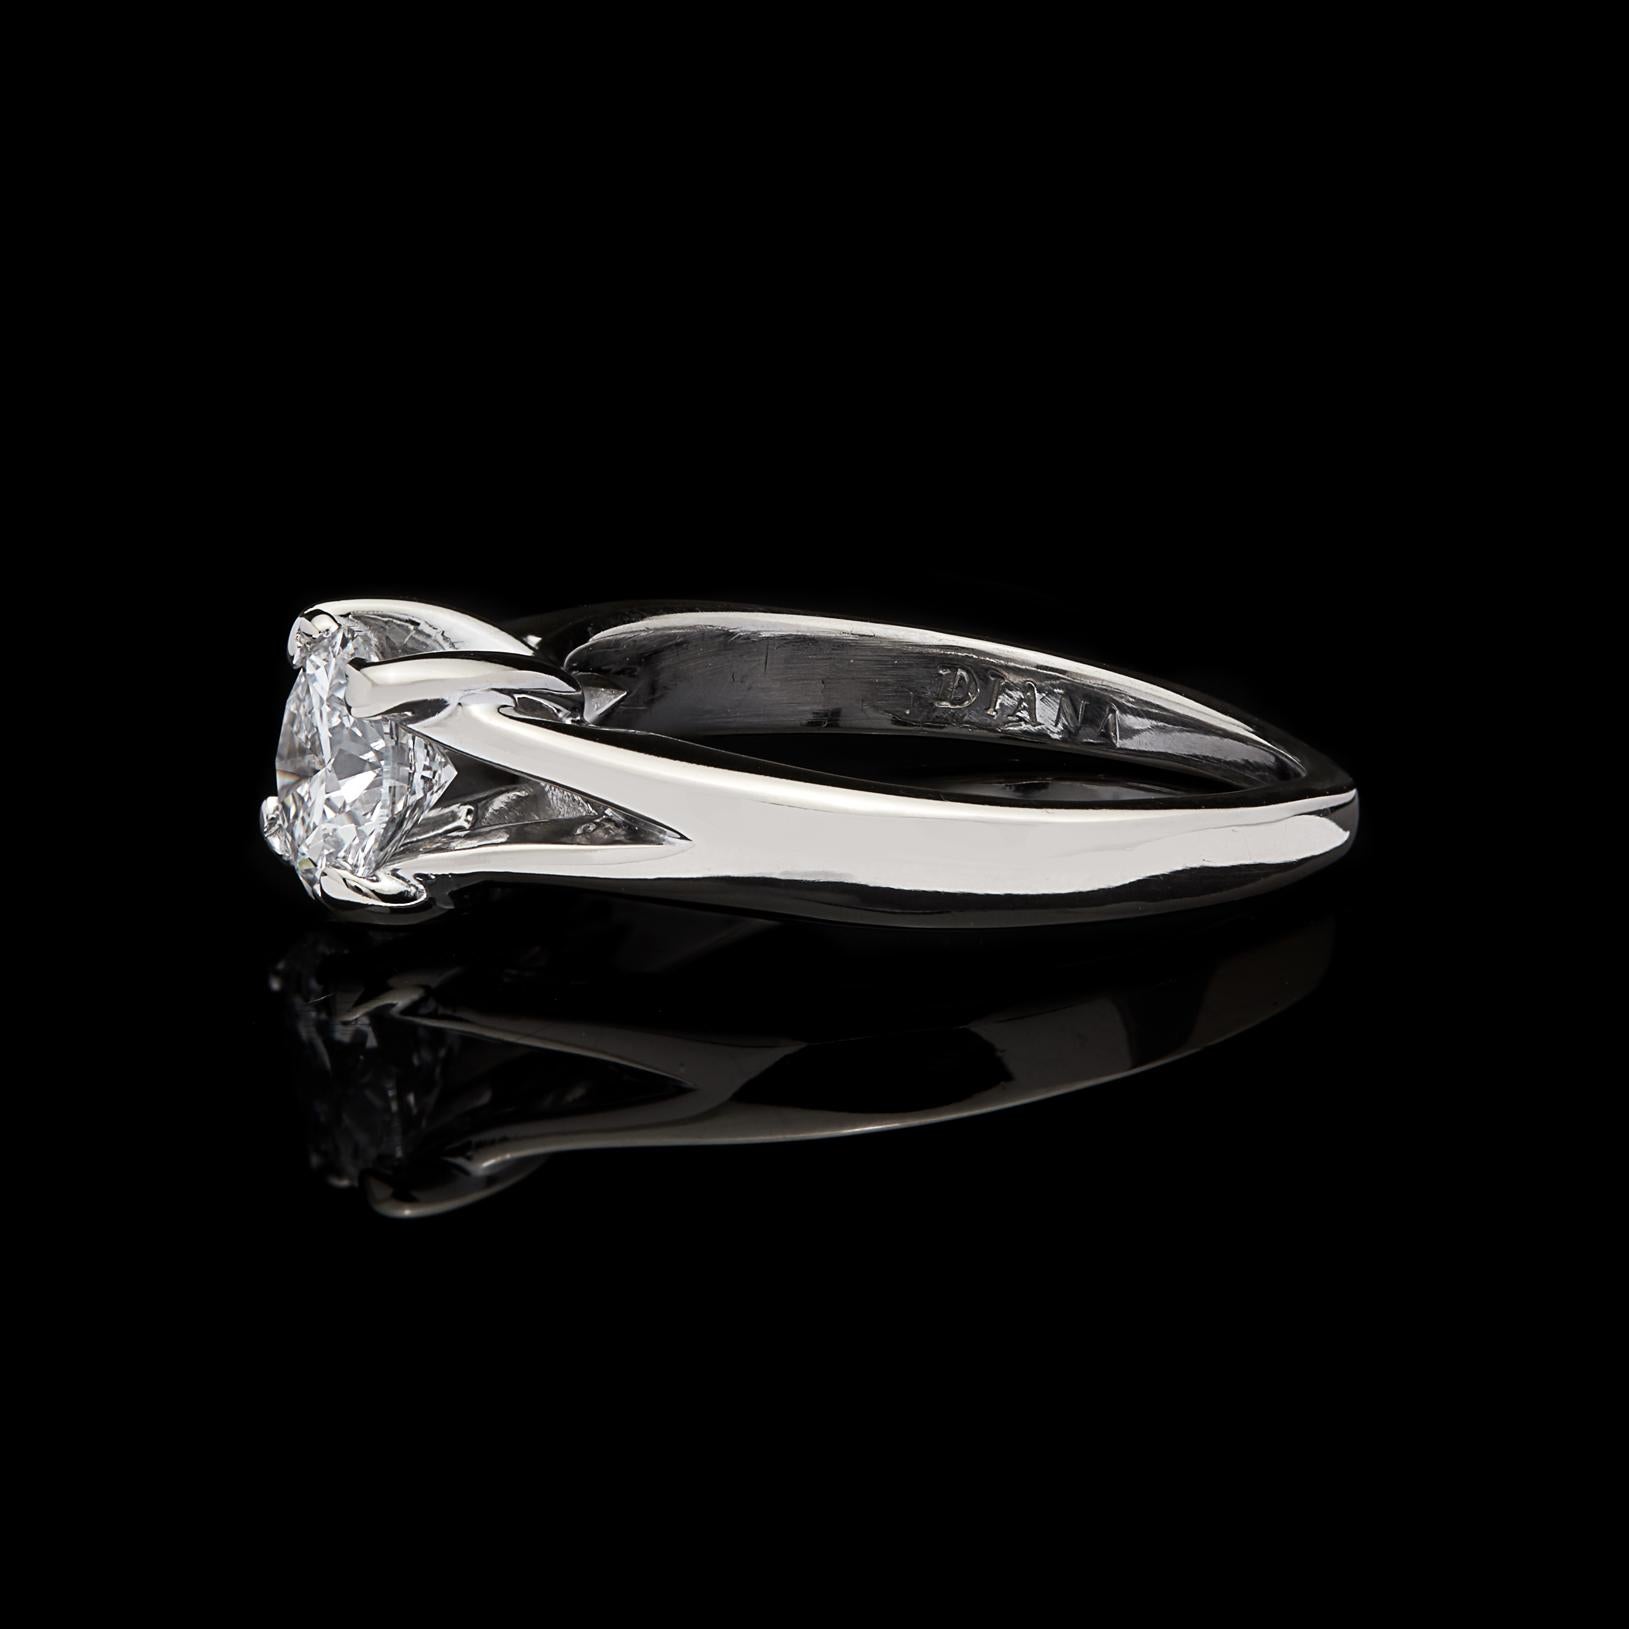 With top quality and beauty, this 18k white gold engagement ring truly shines. The 0.76-carat round brilliant-cut diamond is D color and VS2 clarity, set in 4-prongs on a split shank. The ring weighs 4.0 grams, and is currently size 5, with easy